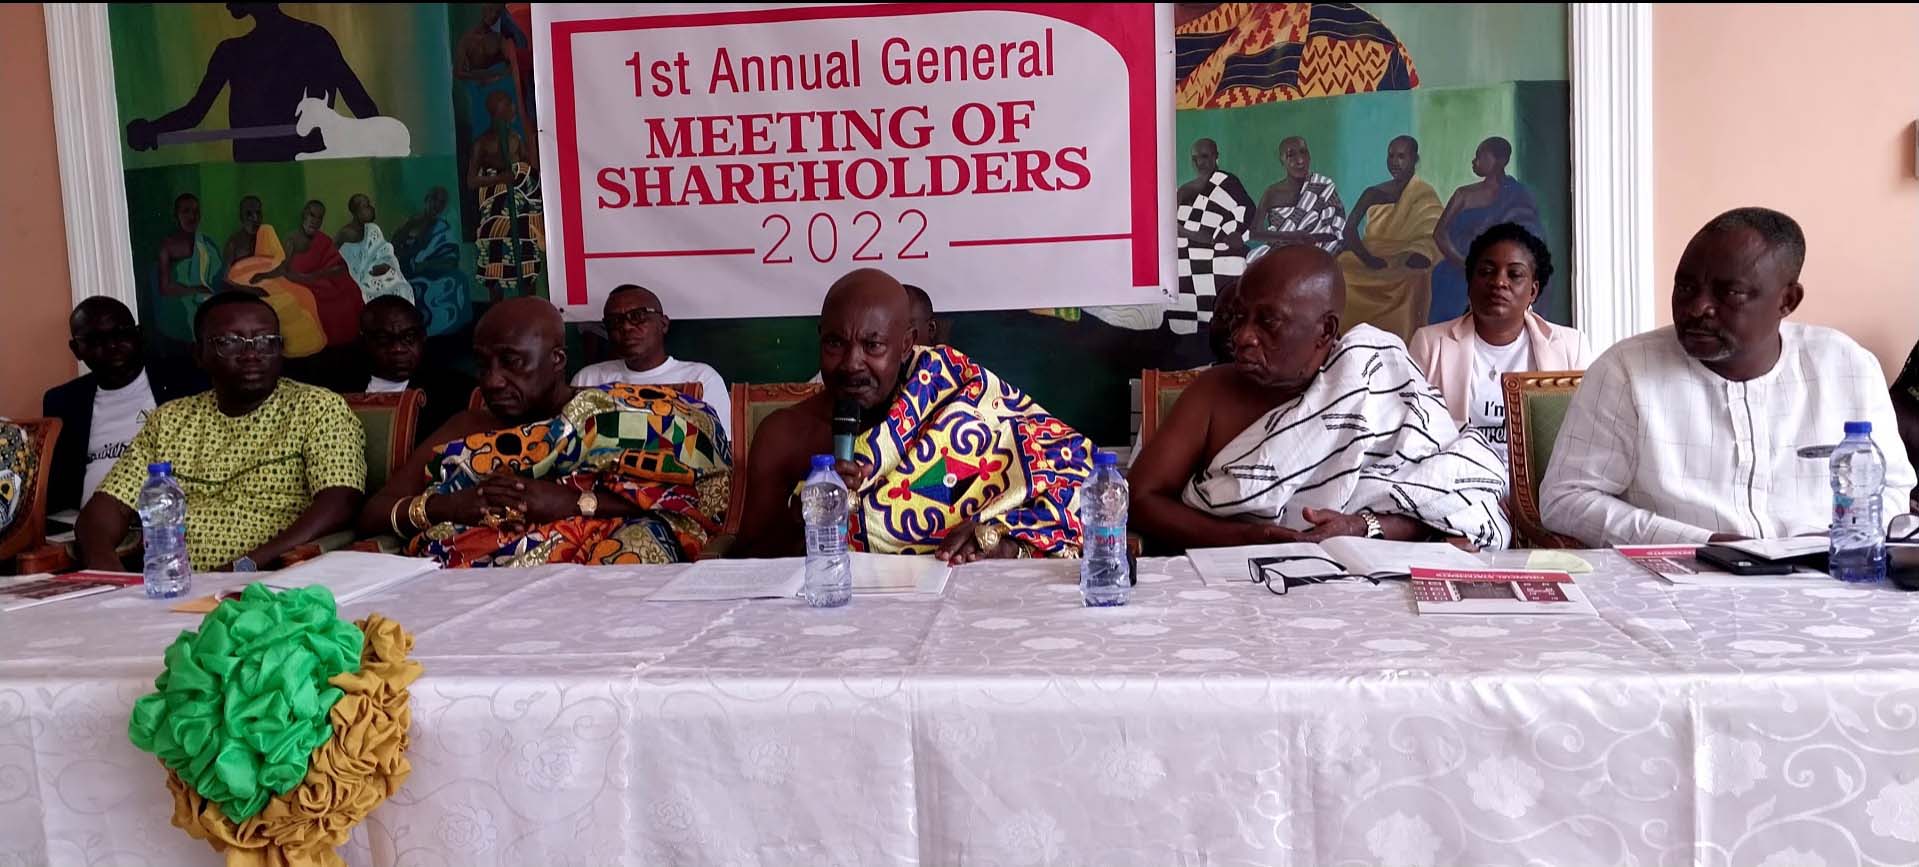 Nana Boakye Ansah Debrah, Chairman of the Board of Directors (middle), flanked by other directors while addressing shareholders